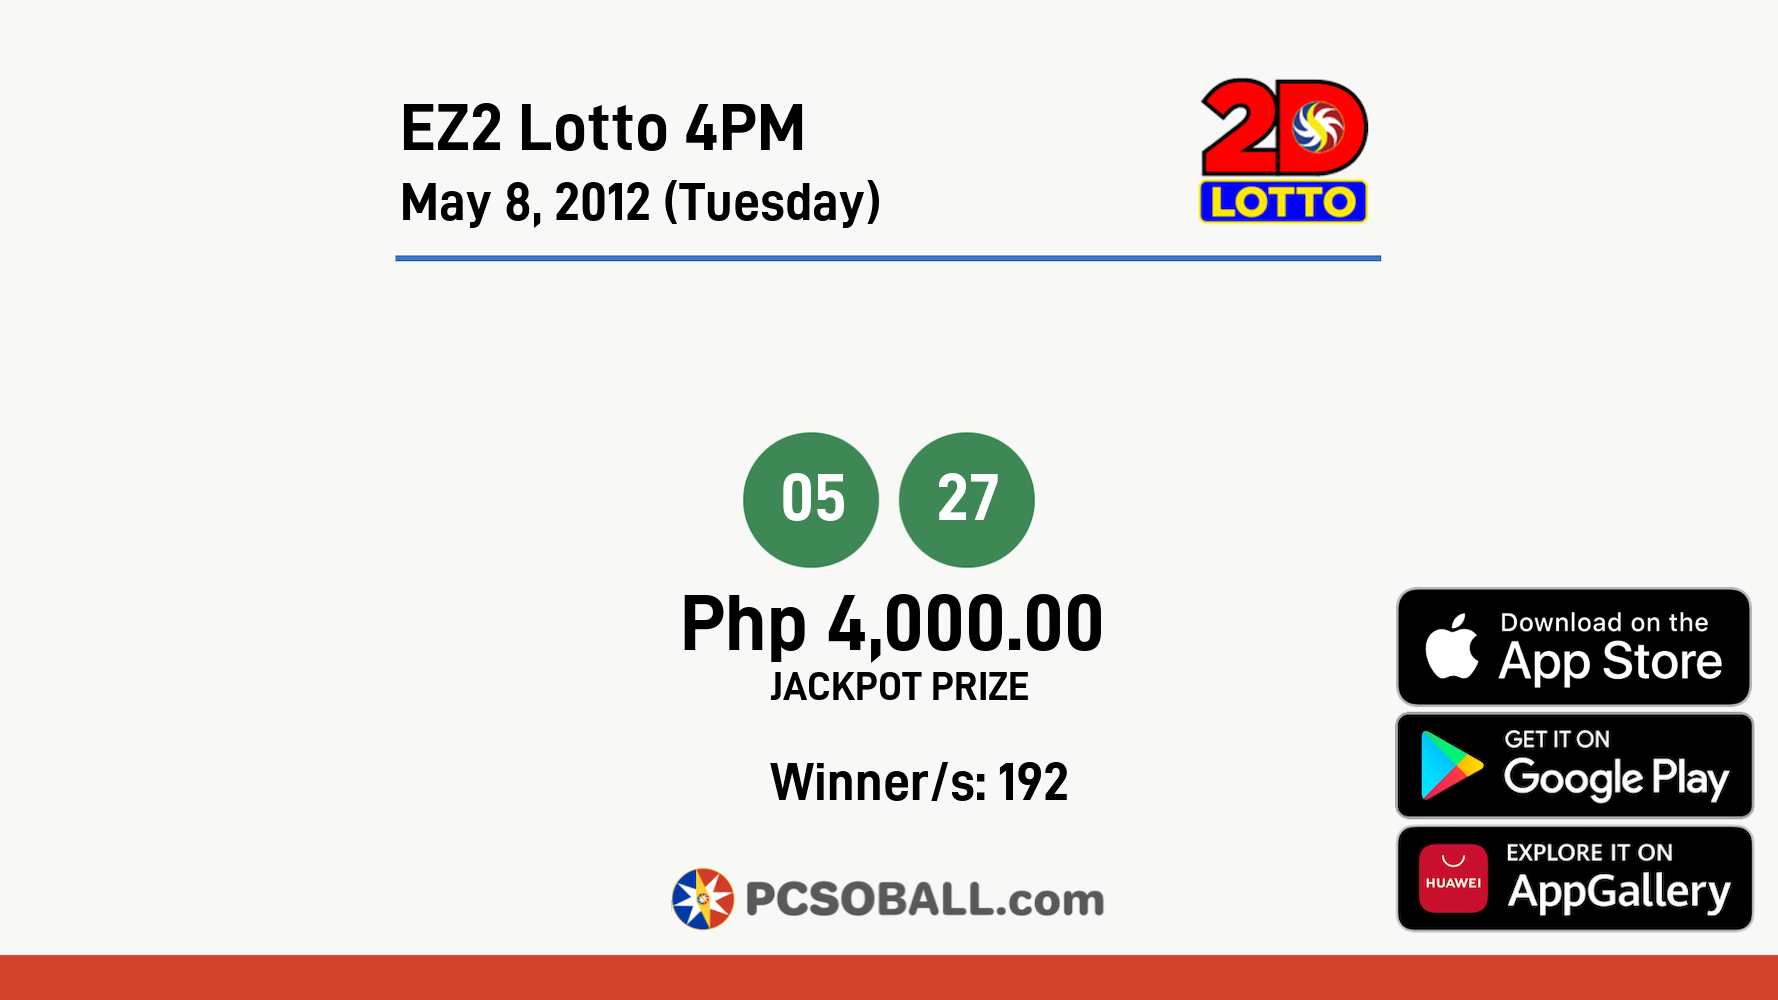 EZ2 Lotto 4PM May 8, 2012 (Tuesday) Result